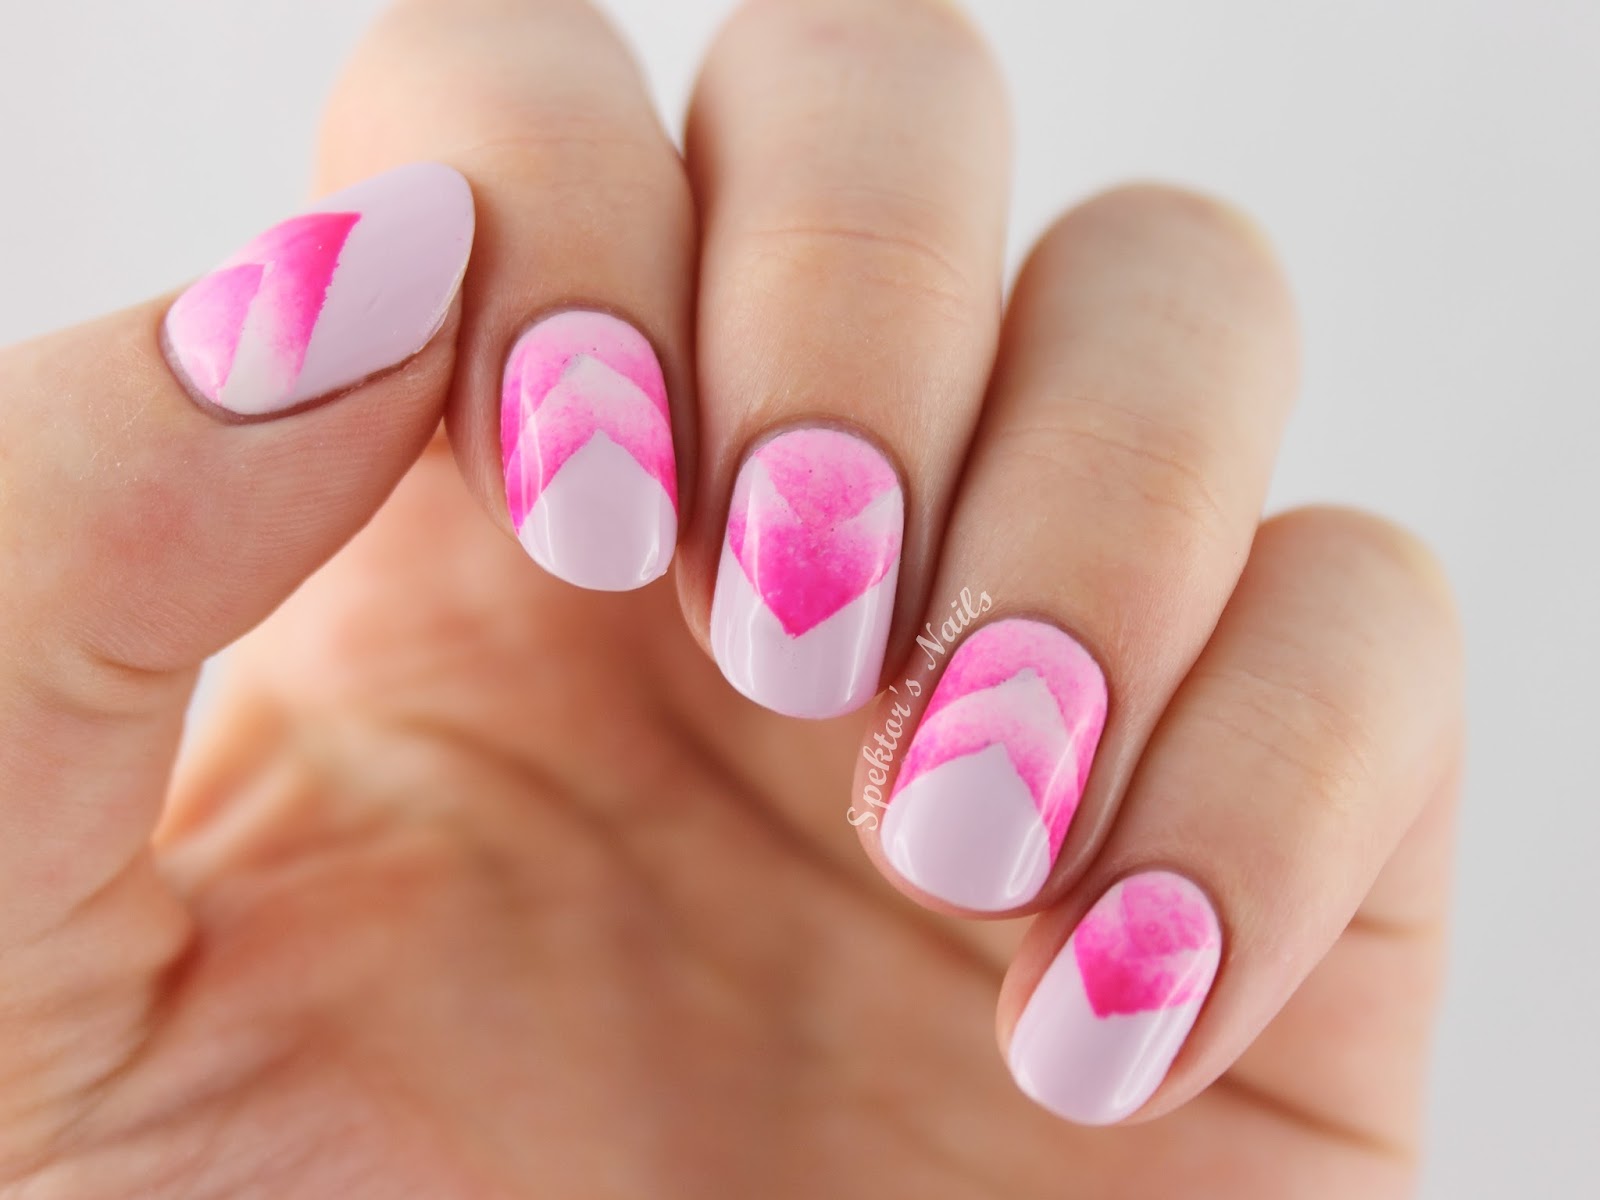 1. Pink and White Gradient Nail Art Tutorial - wide 3